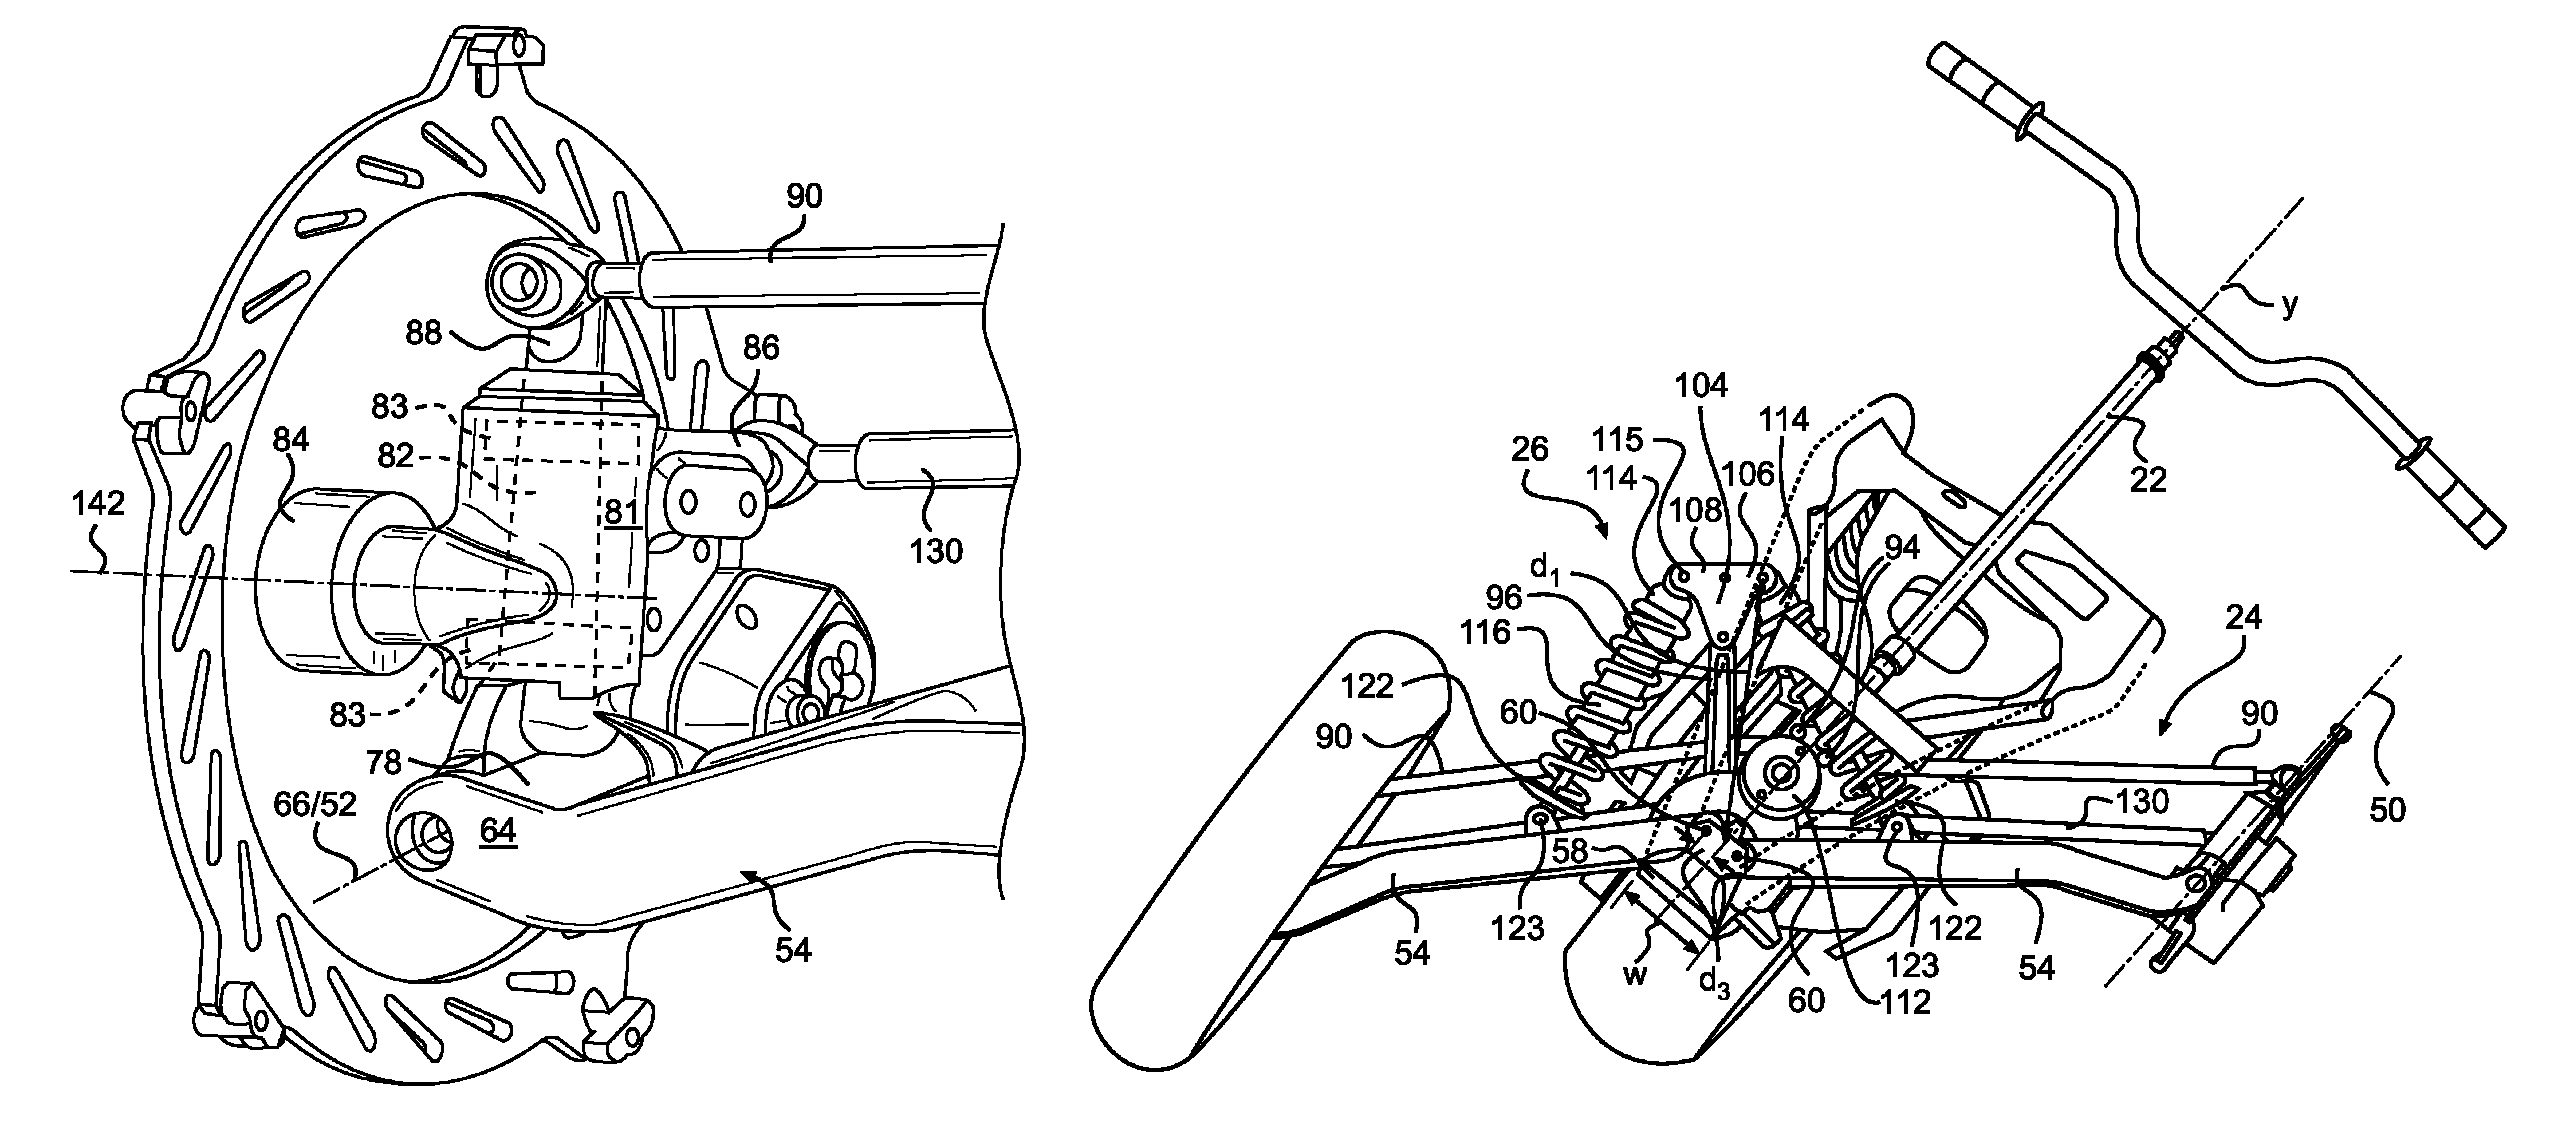 Control system for leaning vehicle